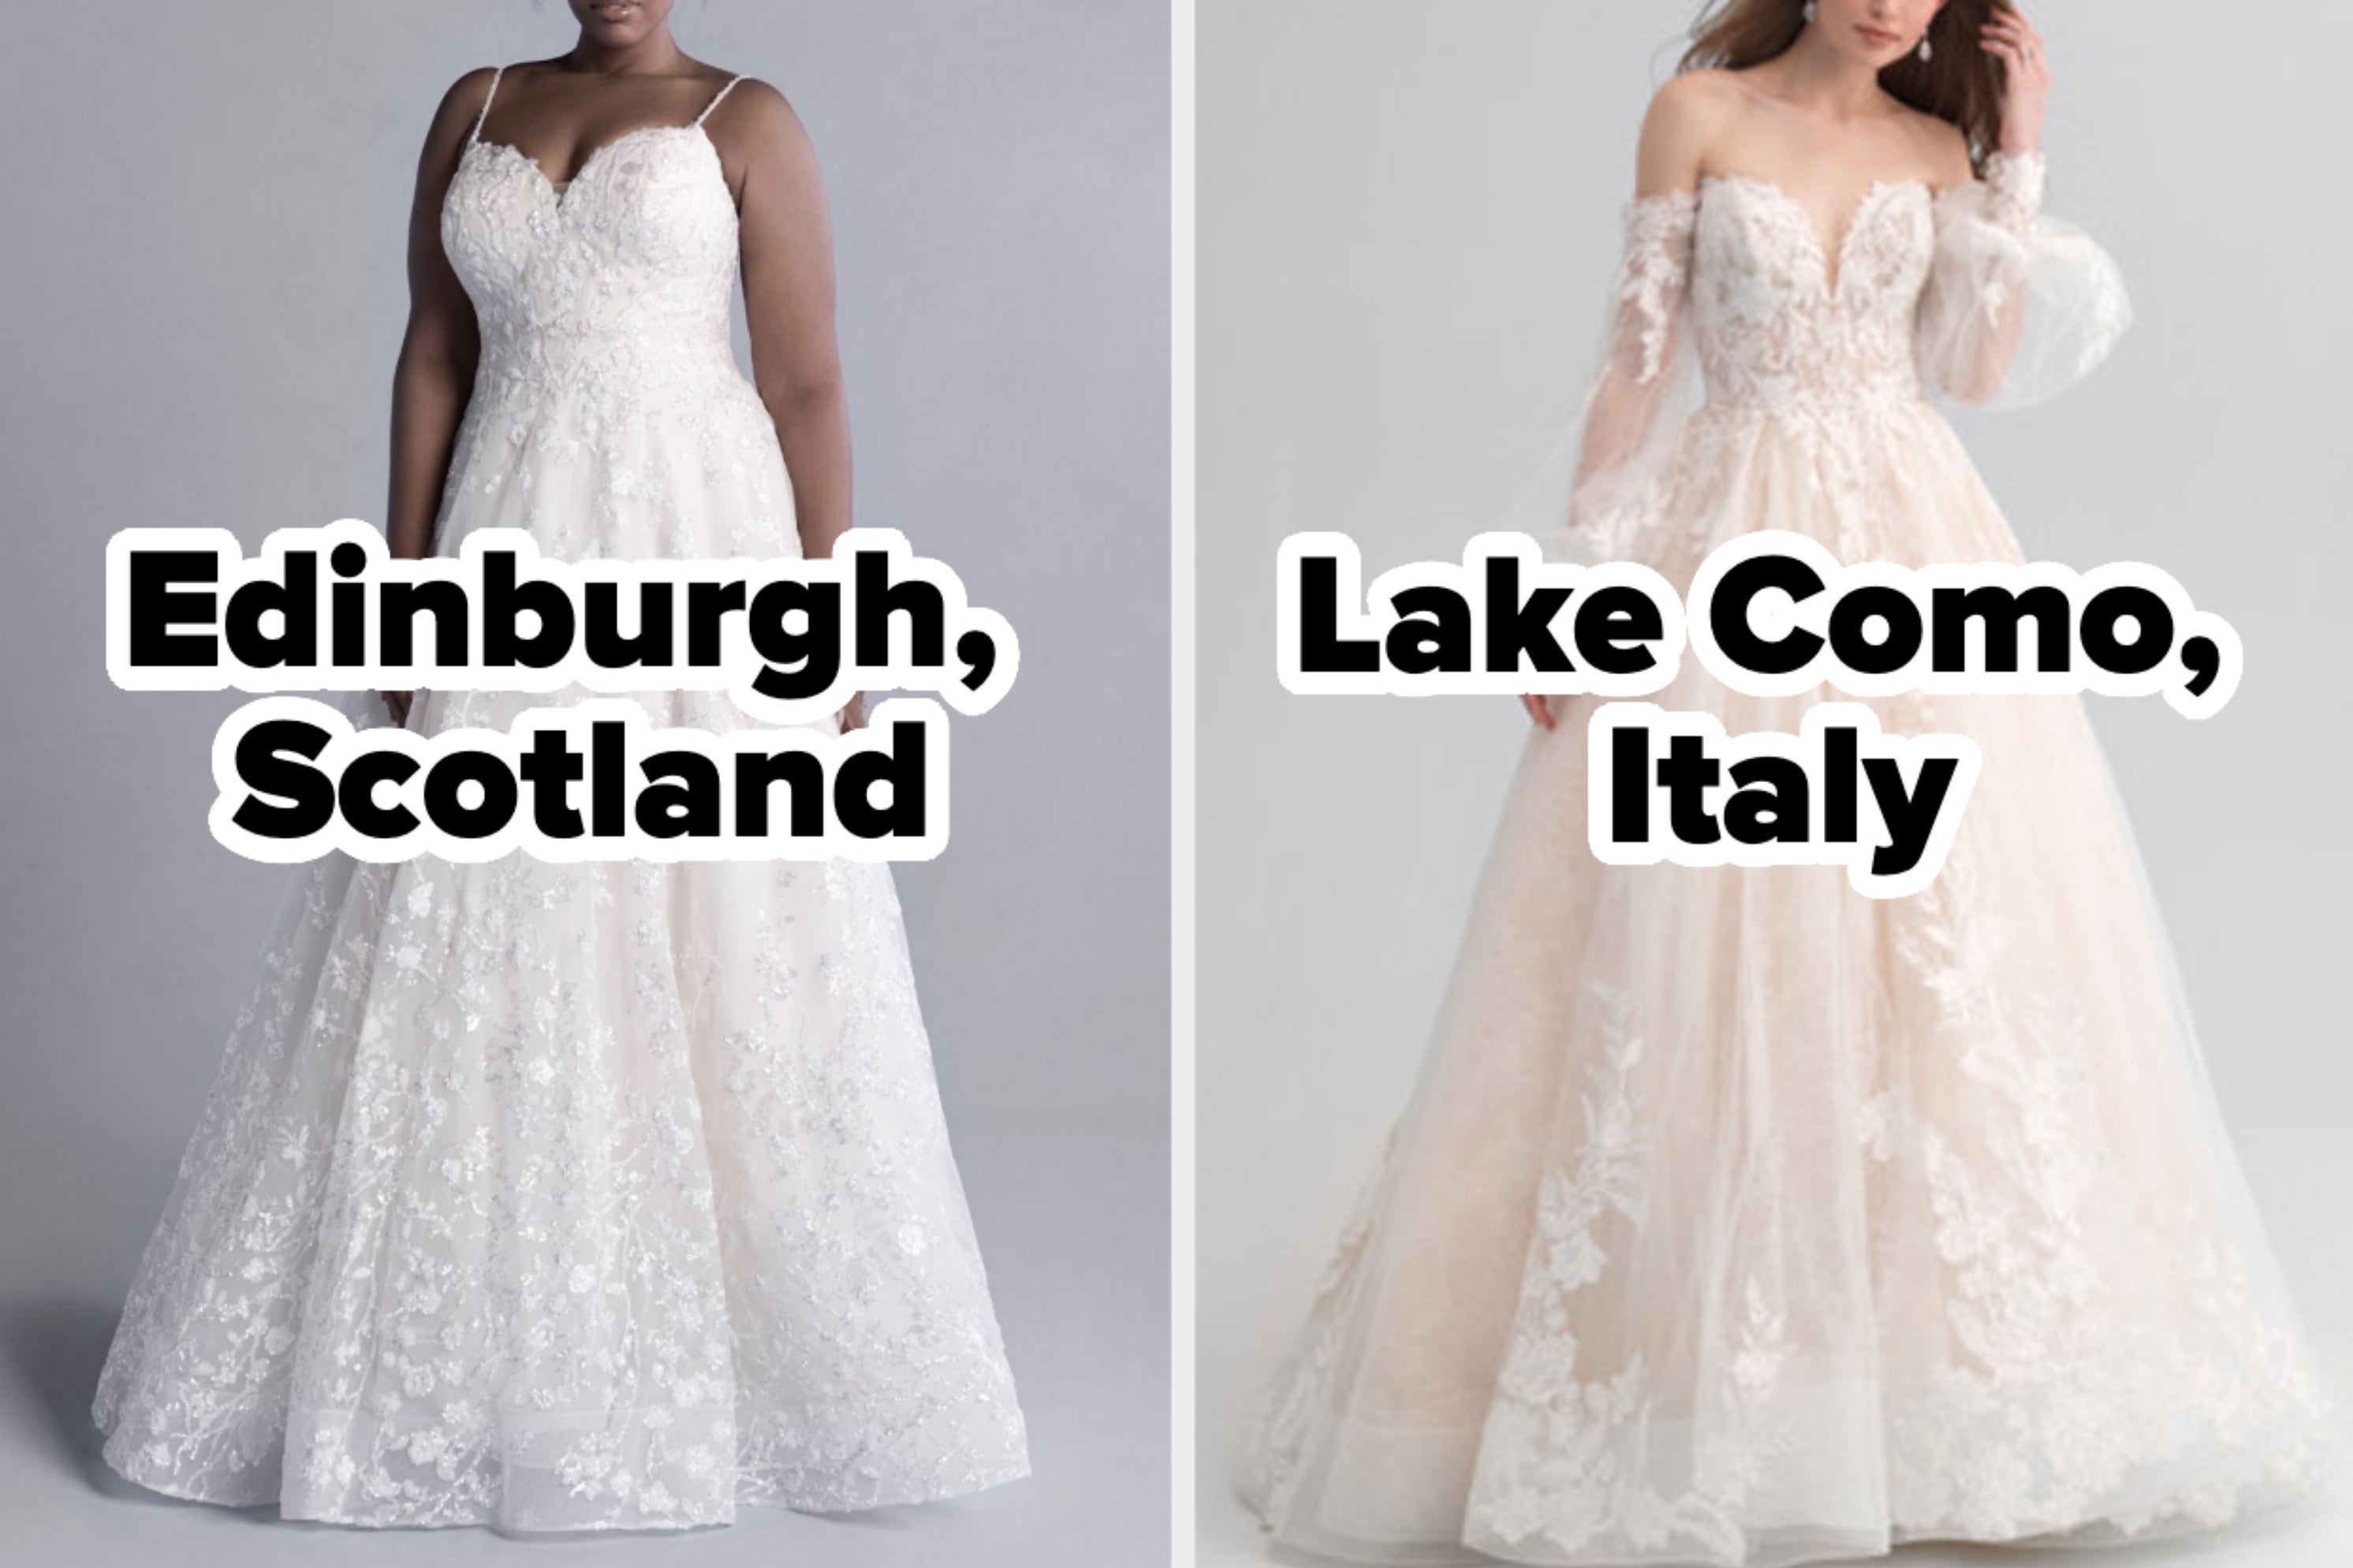 On the left, someone wearing an a-line dress with spaghetti straps and a lacy overlay labeled Edinburgh, Scotland, and on the right, someone wearing an off-the-shoulder ball gown with a deep v-neck and a lacy, tulle skirt labeled Lake Como, Italy